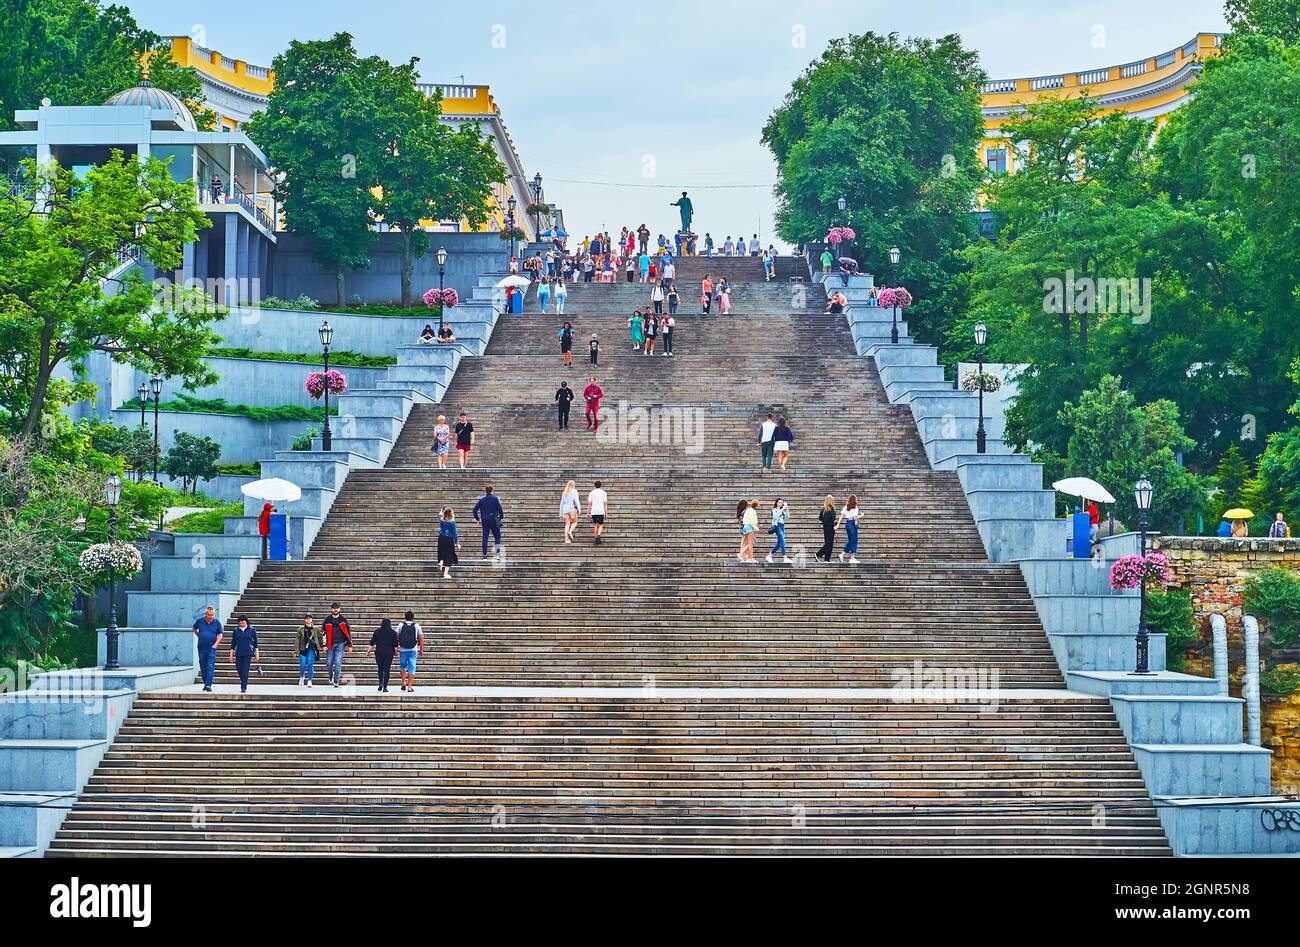 ODESSA, UKRAINE - June 18, 2021: The monumental historic Potemkin Stairs and the bronze monument to Duc de Richelieu on the top, on June 18 in Odessa Stock Photo